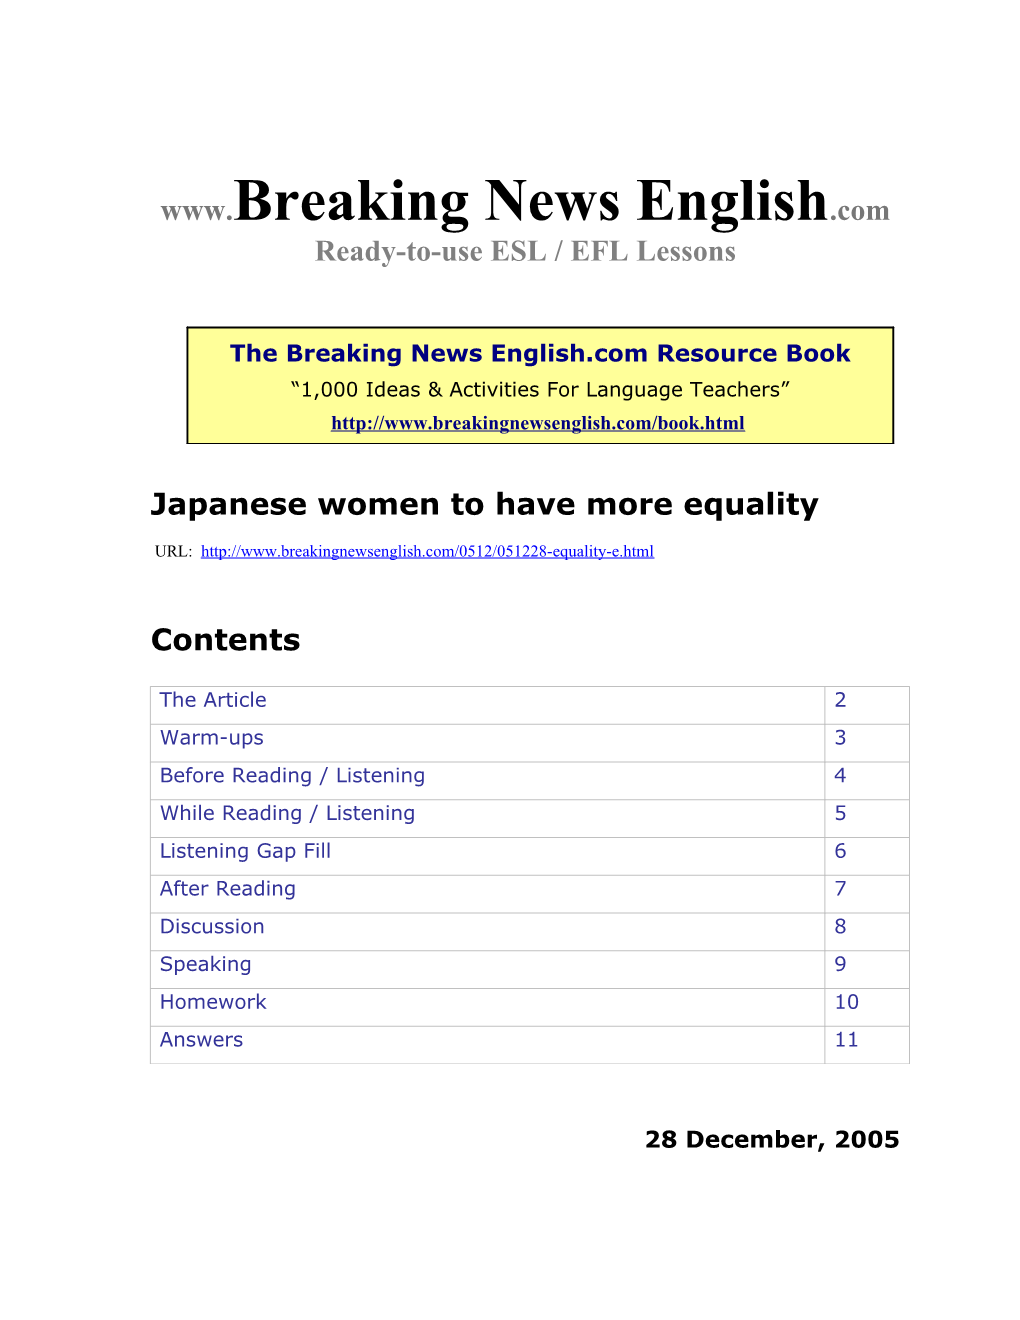 Japanese Women to Have More Equality